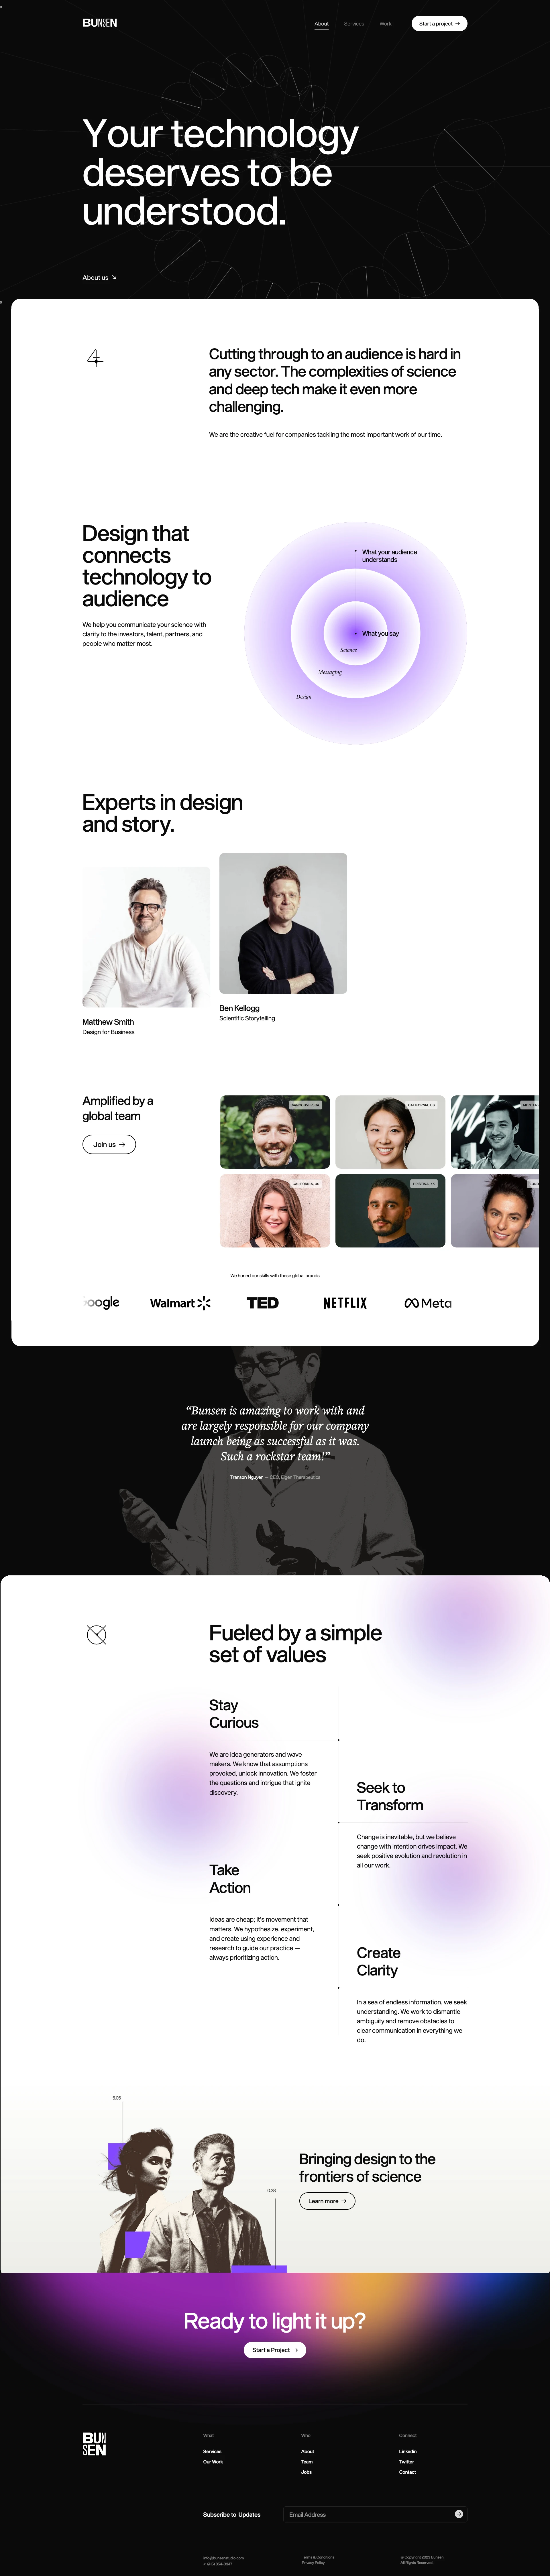 Bunsen Landing Page Example: Bunsen is a full-service creative and communications studio serving science and frontier technology companies.